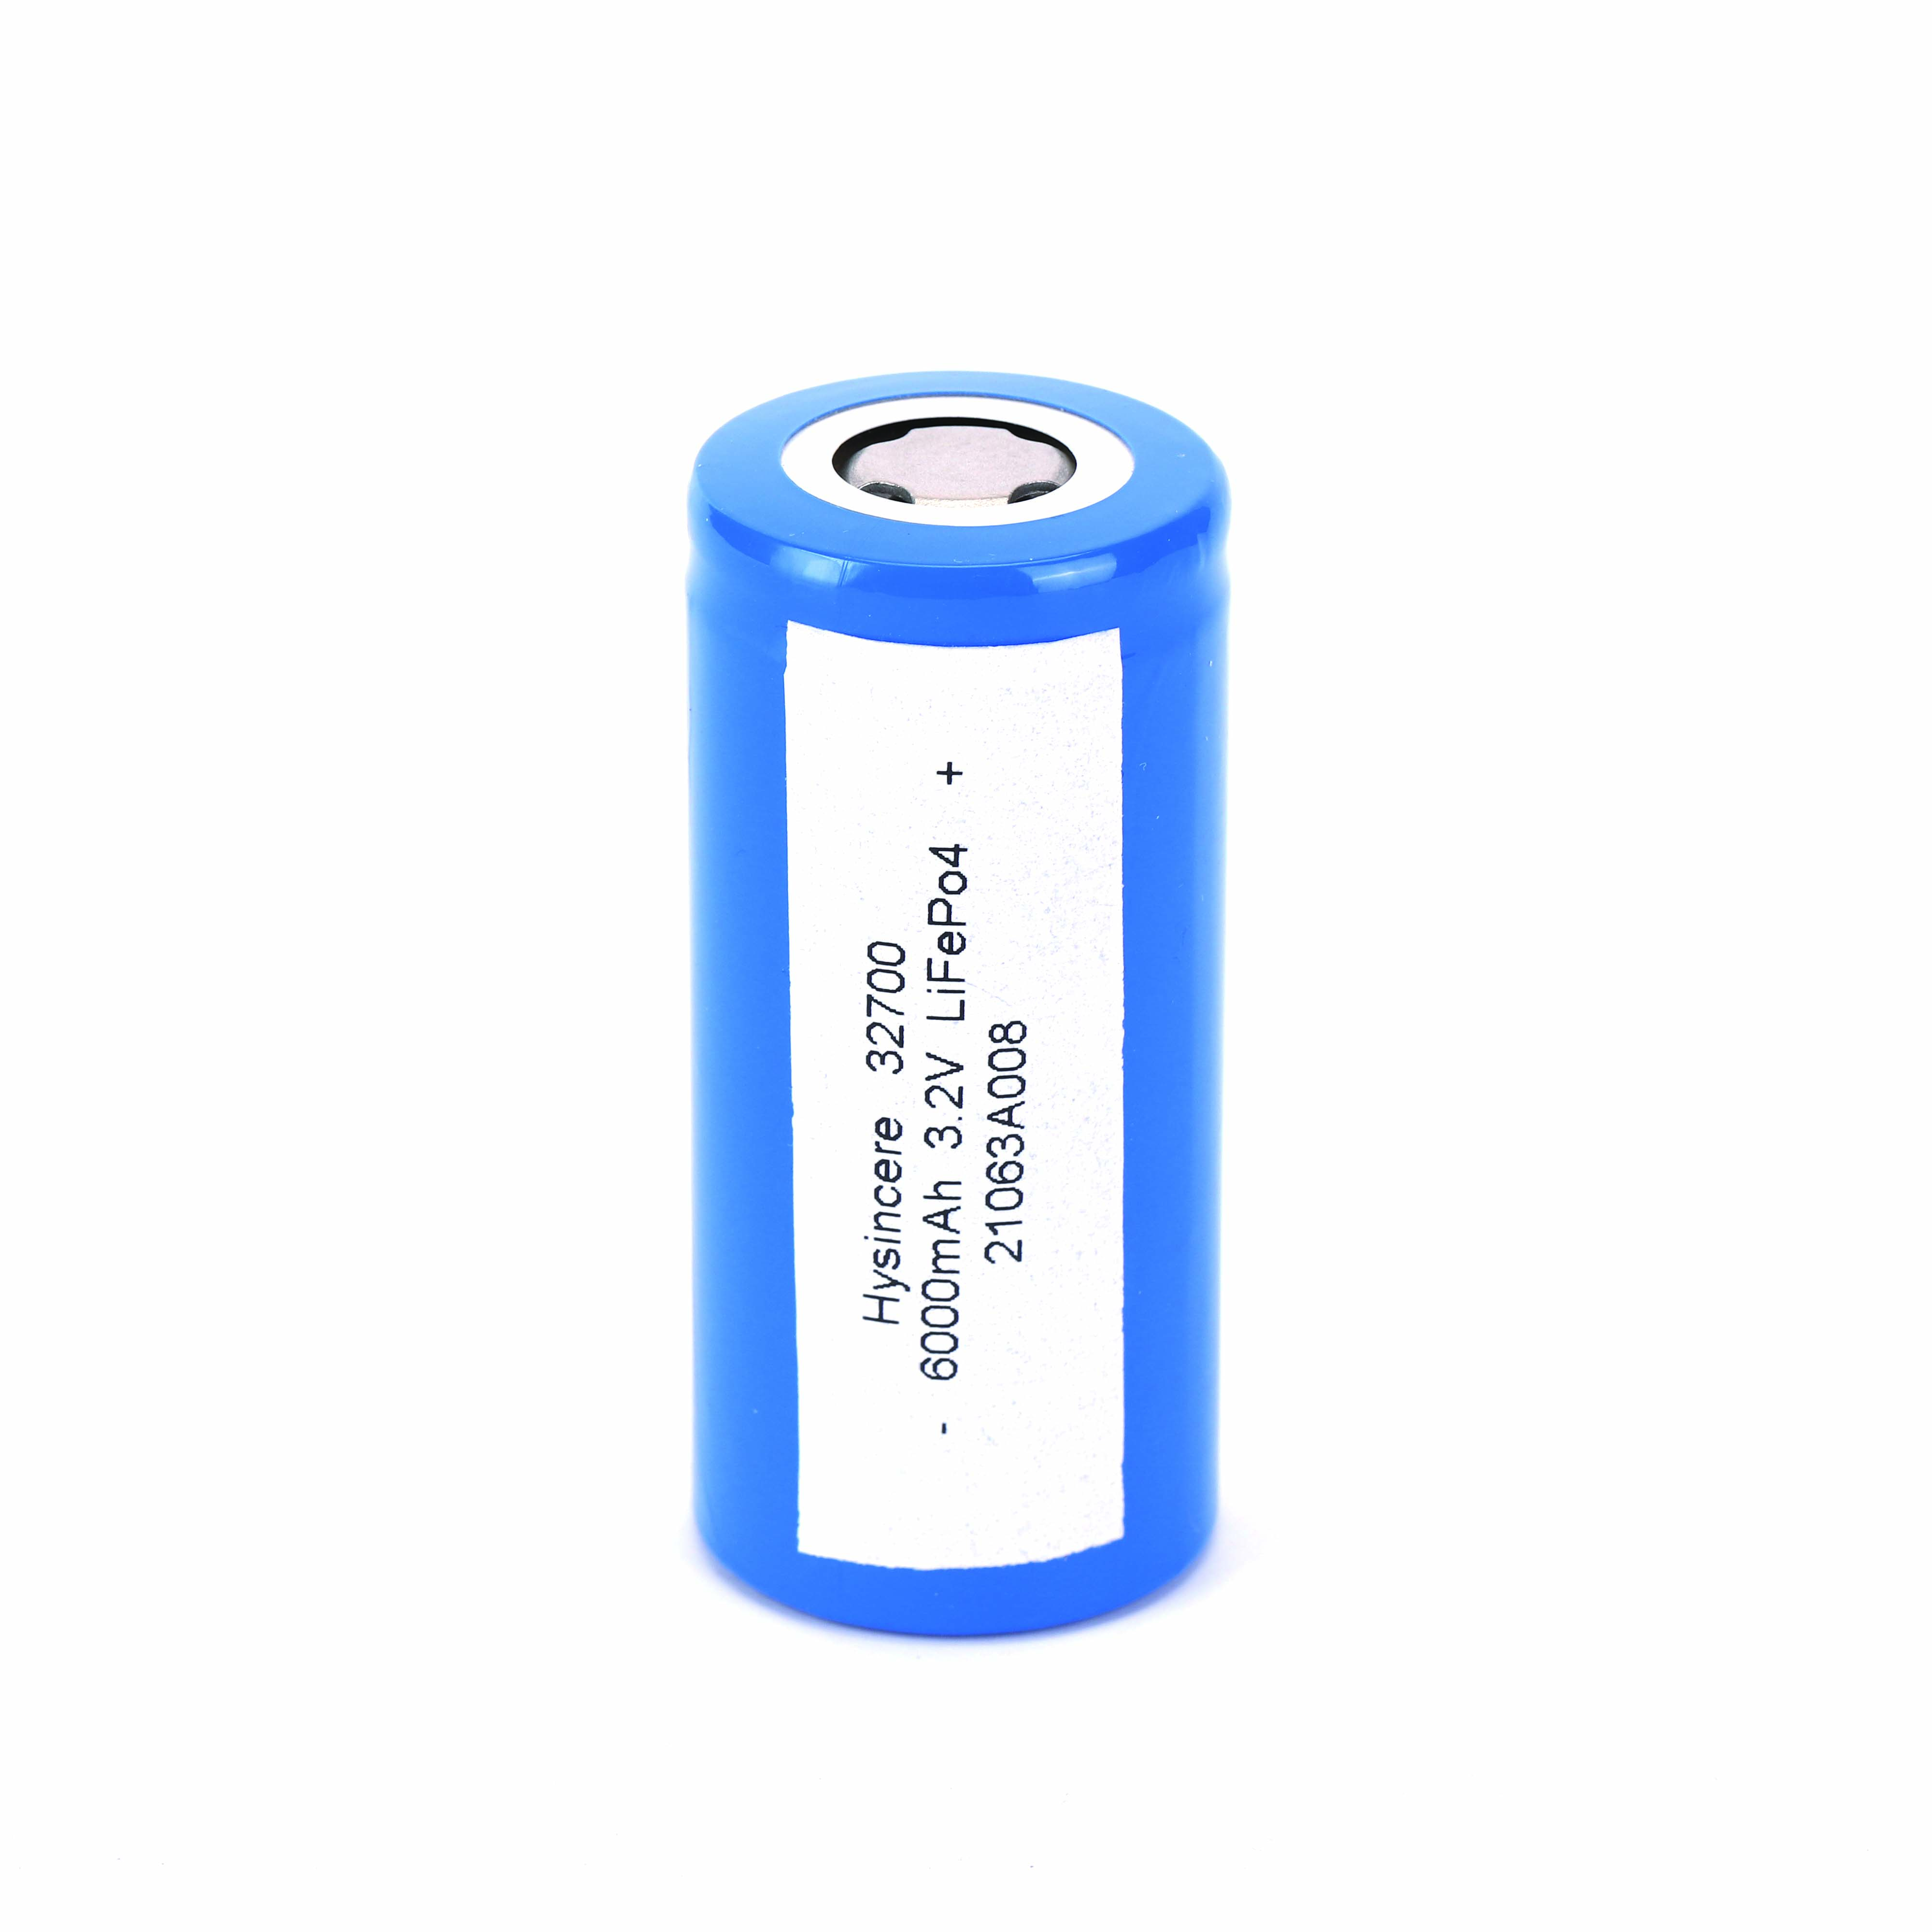 Lithium Ion Battery Low Temperature Rechargeable 18650 26650 -40°C